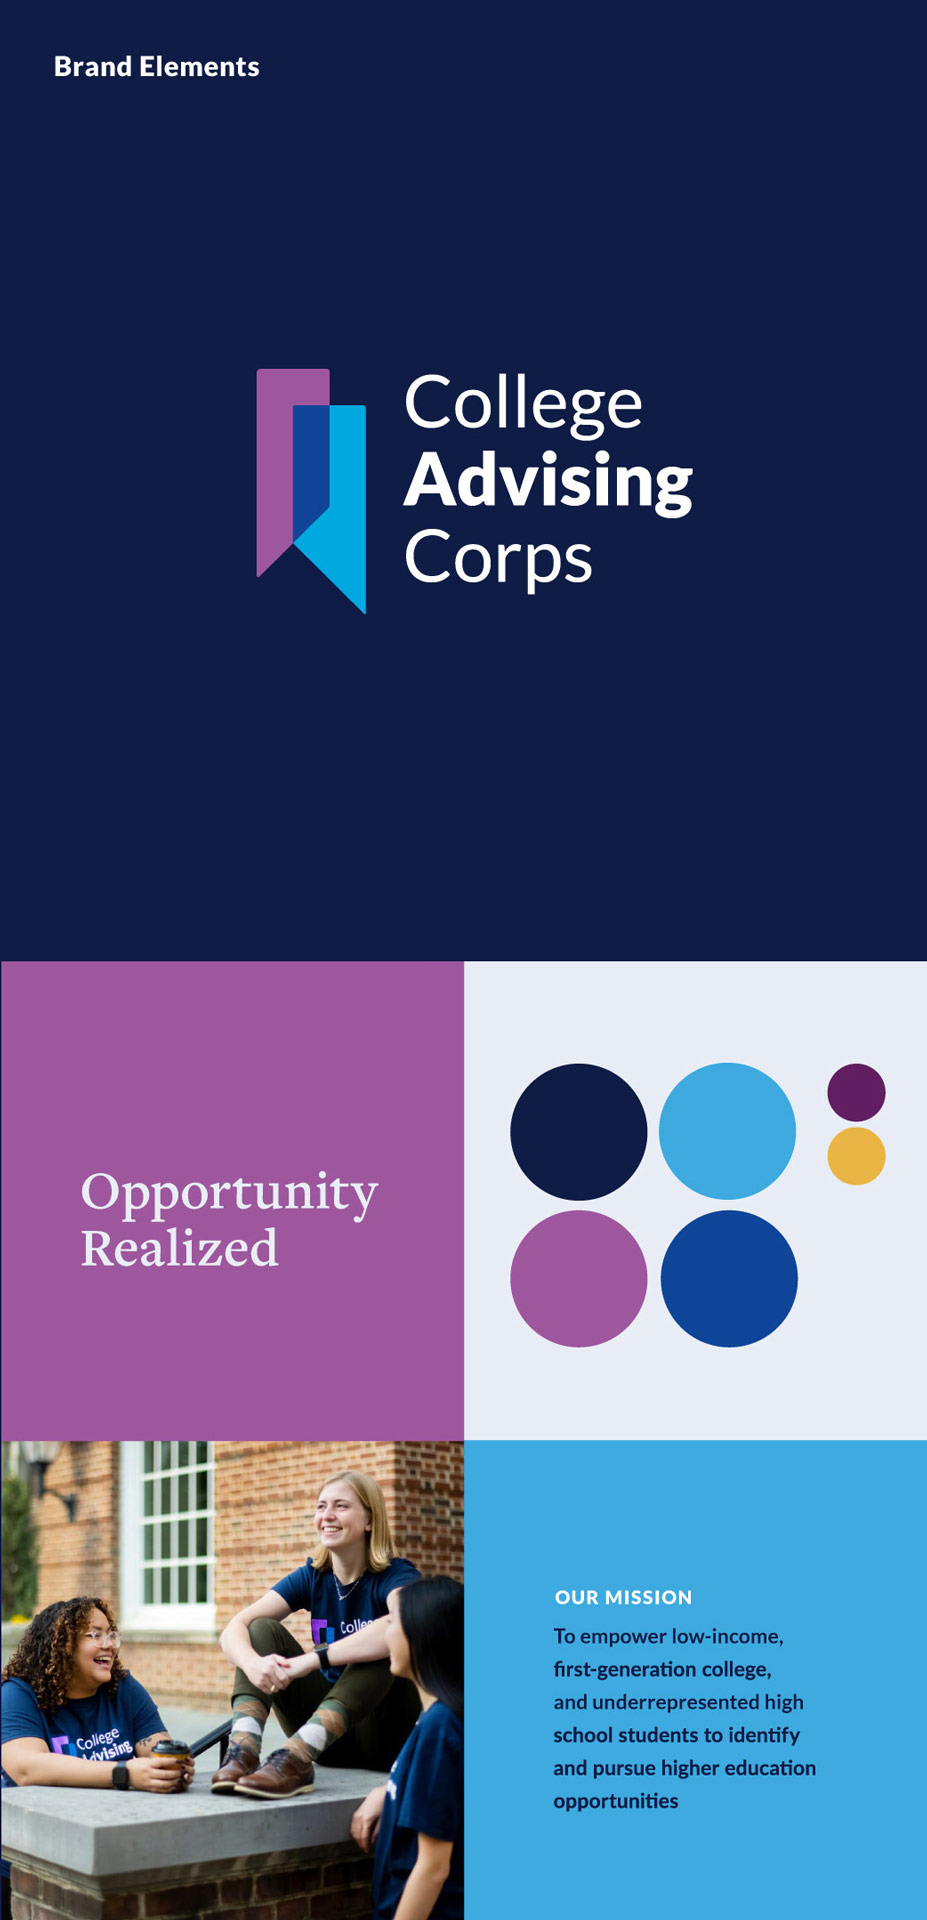 College Advising Corps brand elements including logo, typography, color palette, and photography style